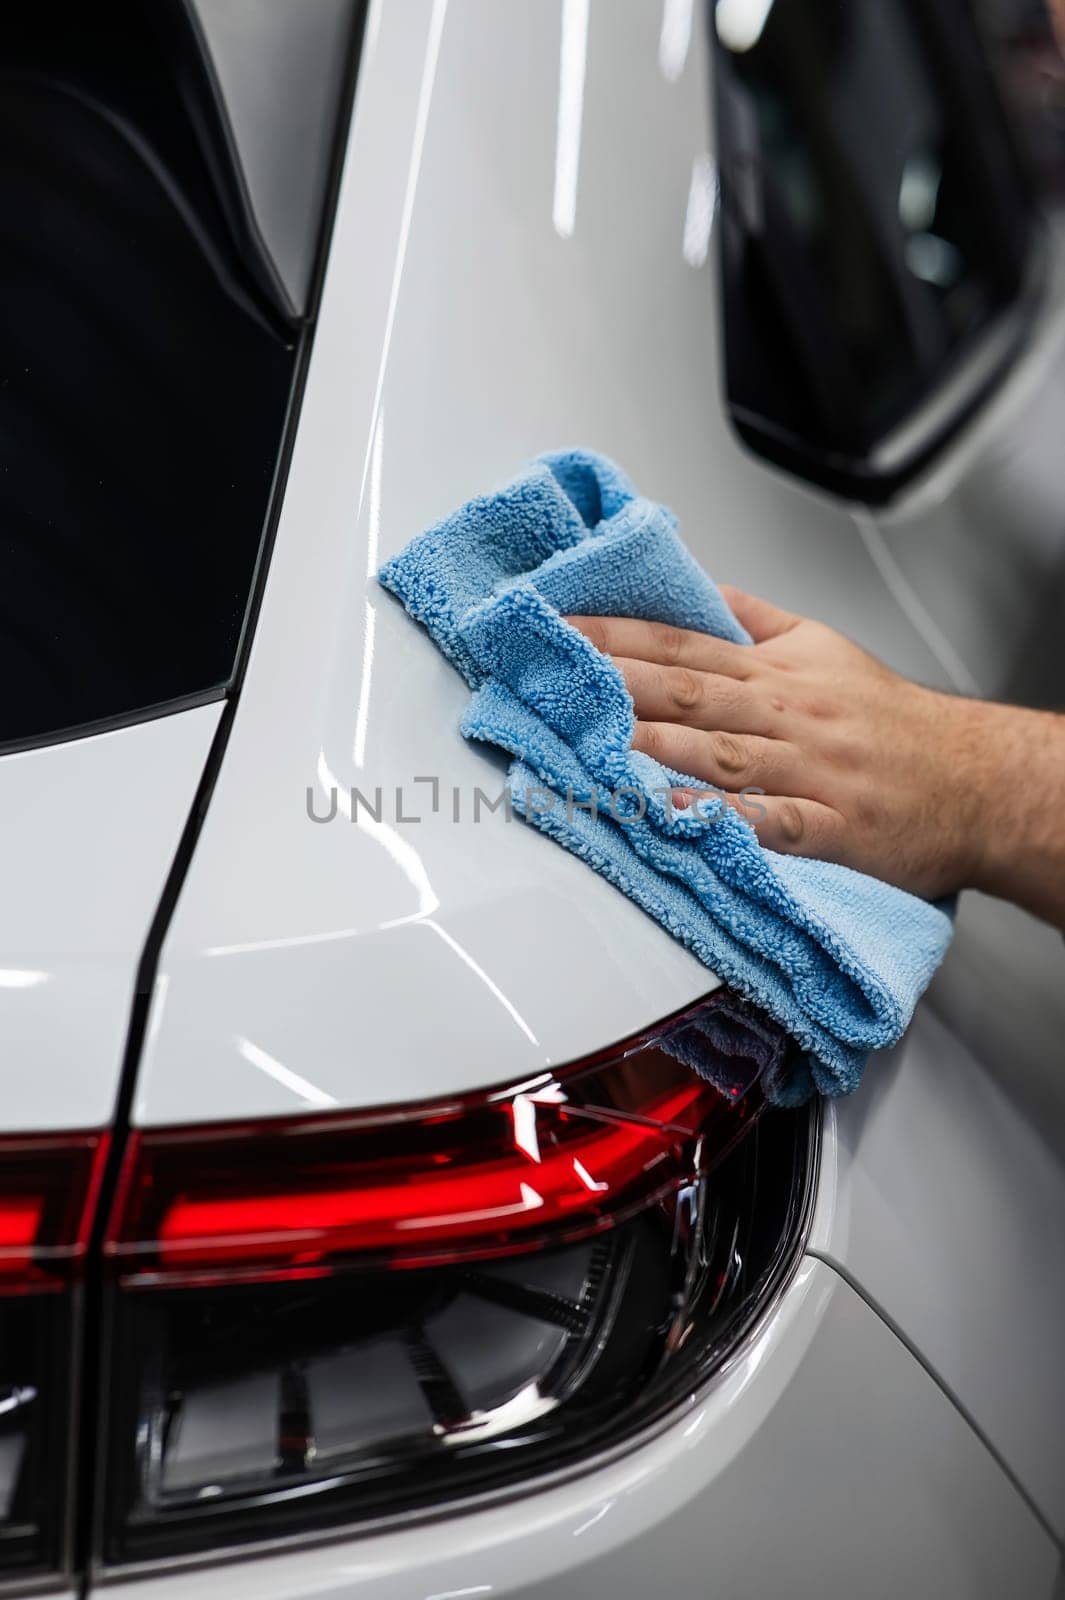 A mechanic wipes the body of a white car with a microfiber cloth. by mrwed54